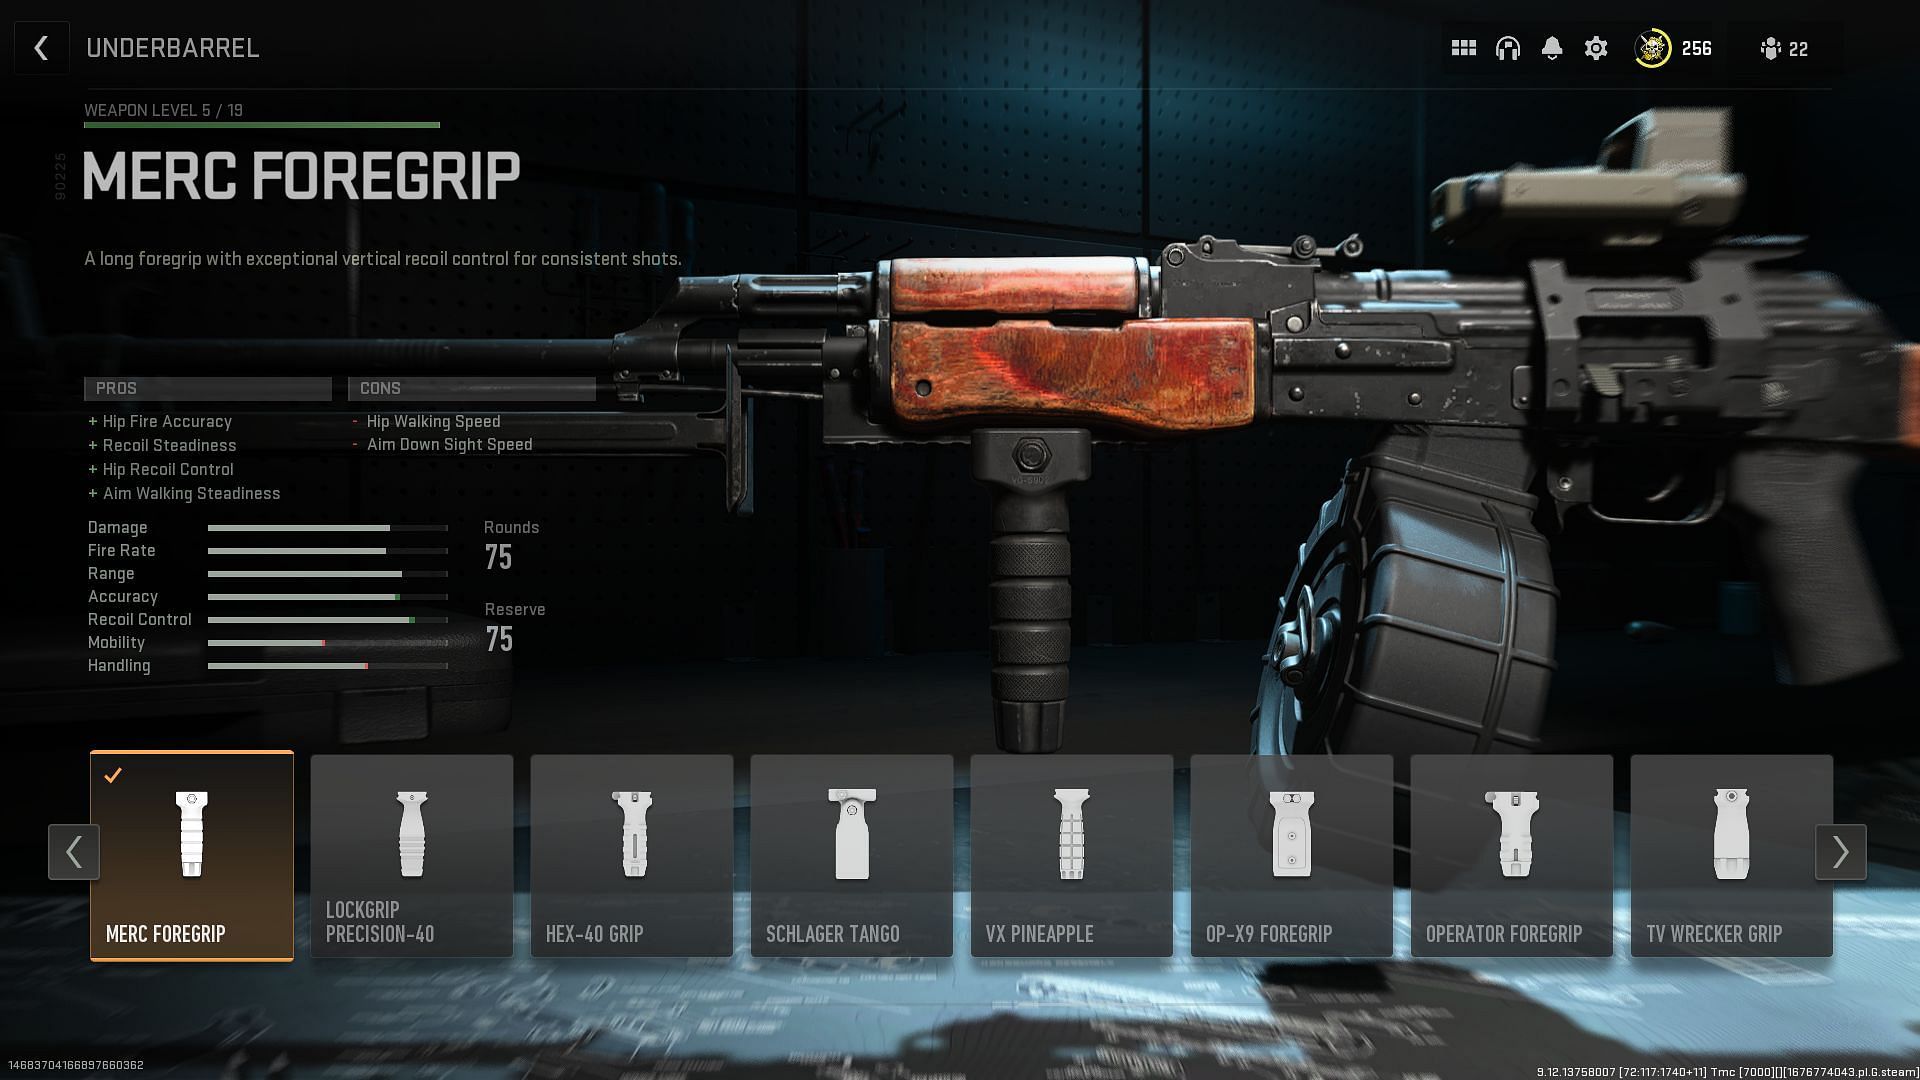 Merc Foregrip for RPK (Image via Activision)